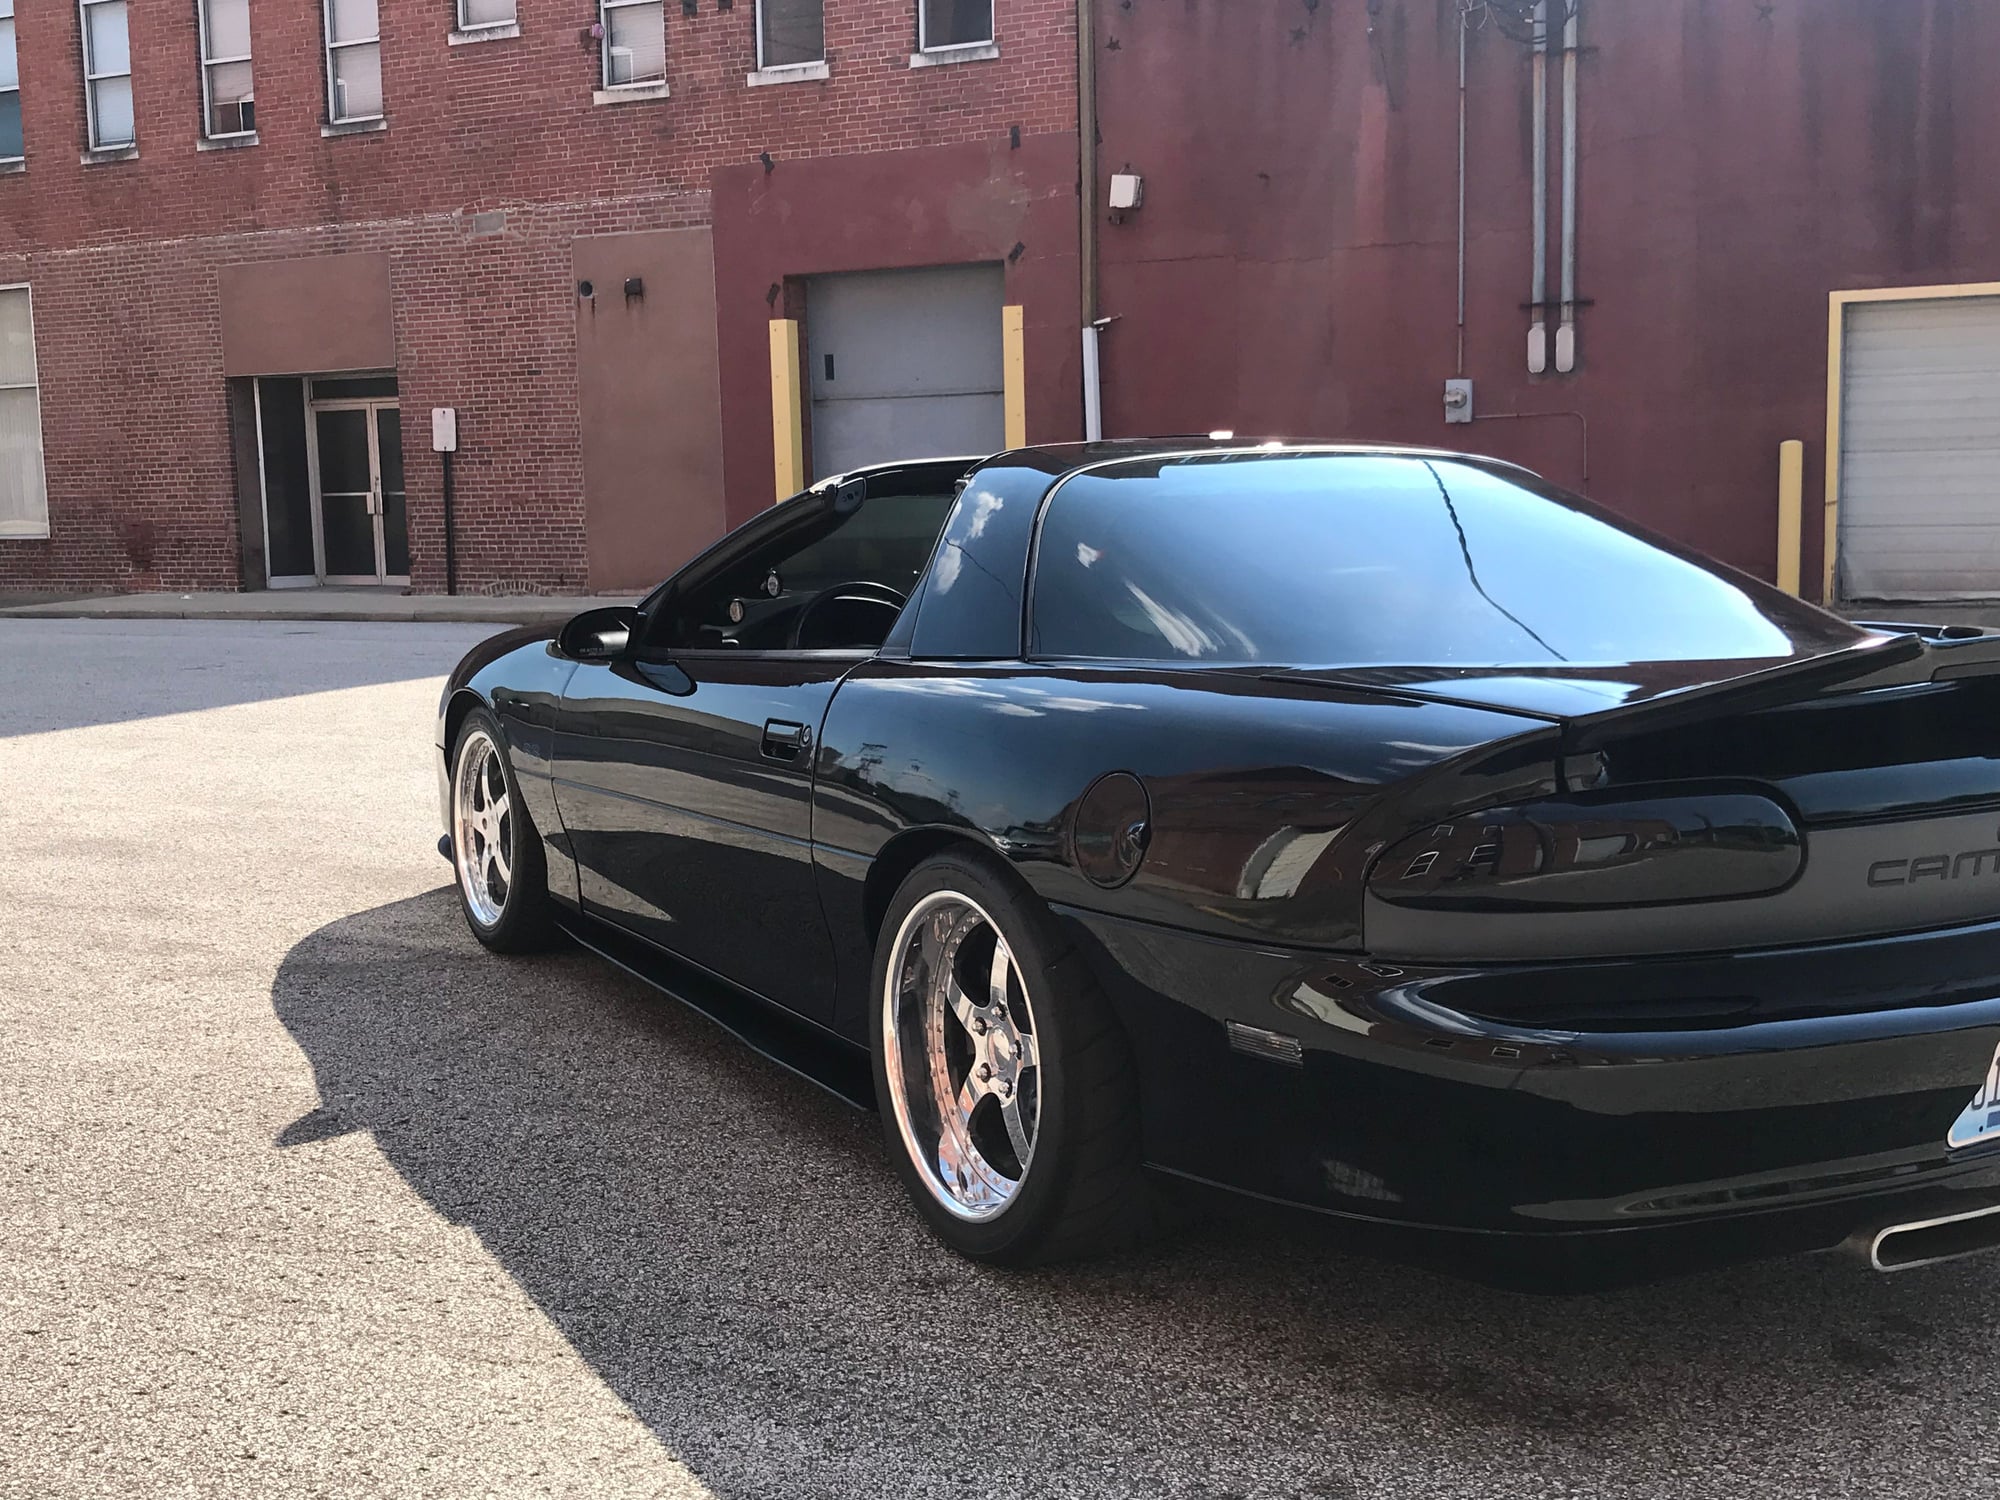 2001 Chevrolet Camaro - 2001 camaro SS supercharged M6 $14500 - Used - VIN 2G1FP22G312125725 - 73,600 Miles - 8 cyl - 2WD - Manual - Coupe - Black - Owensboro Ky, KY 42301, United States